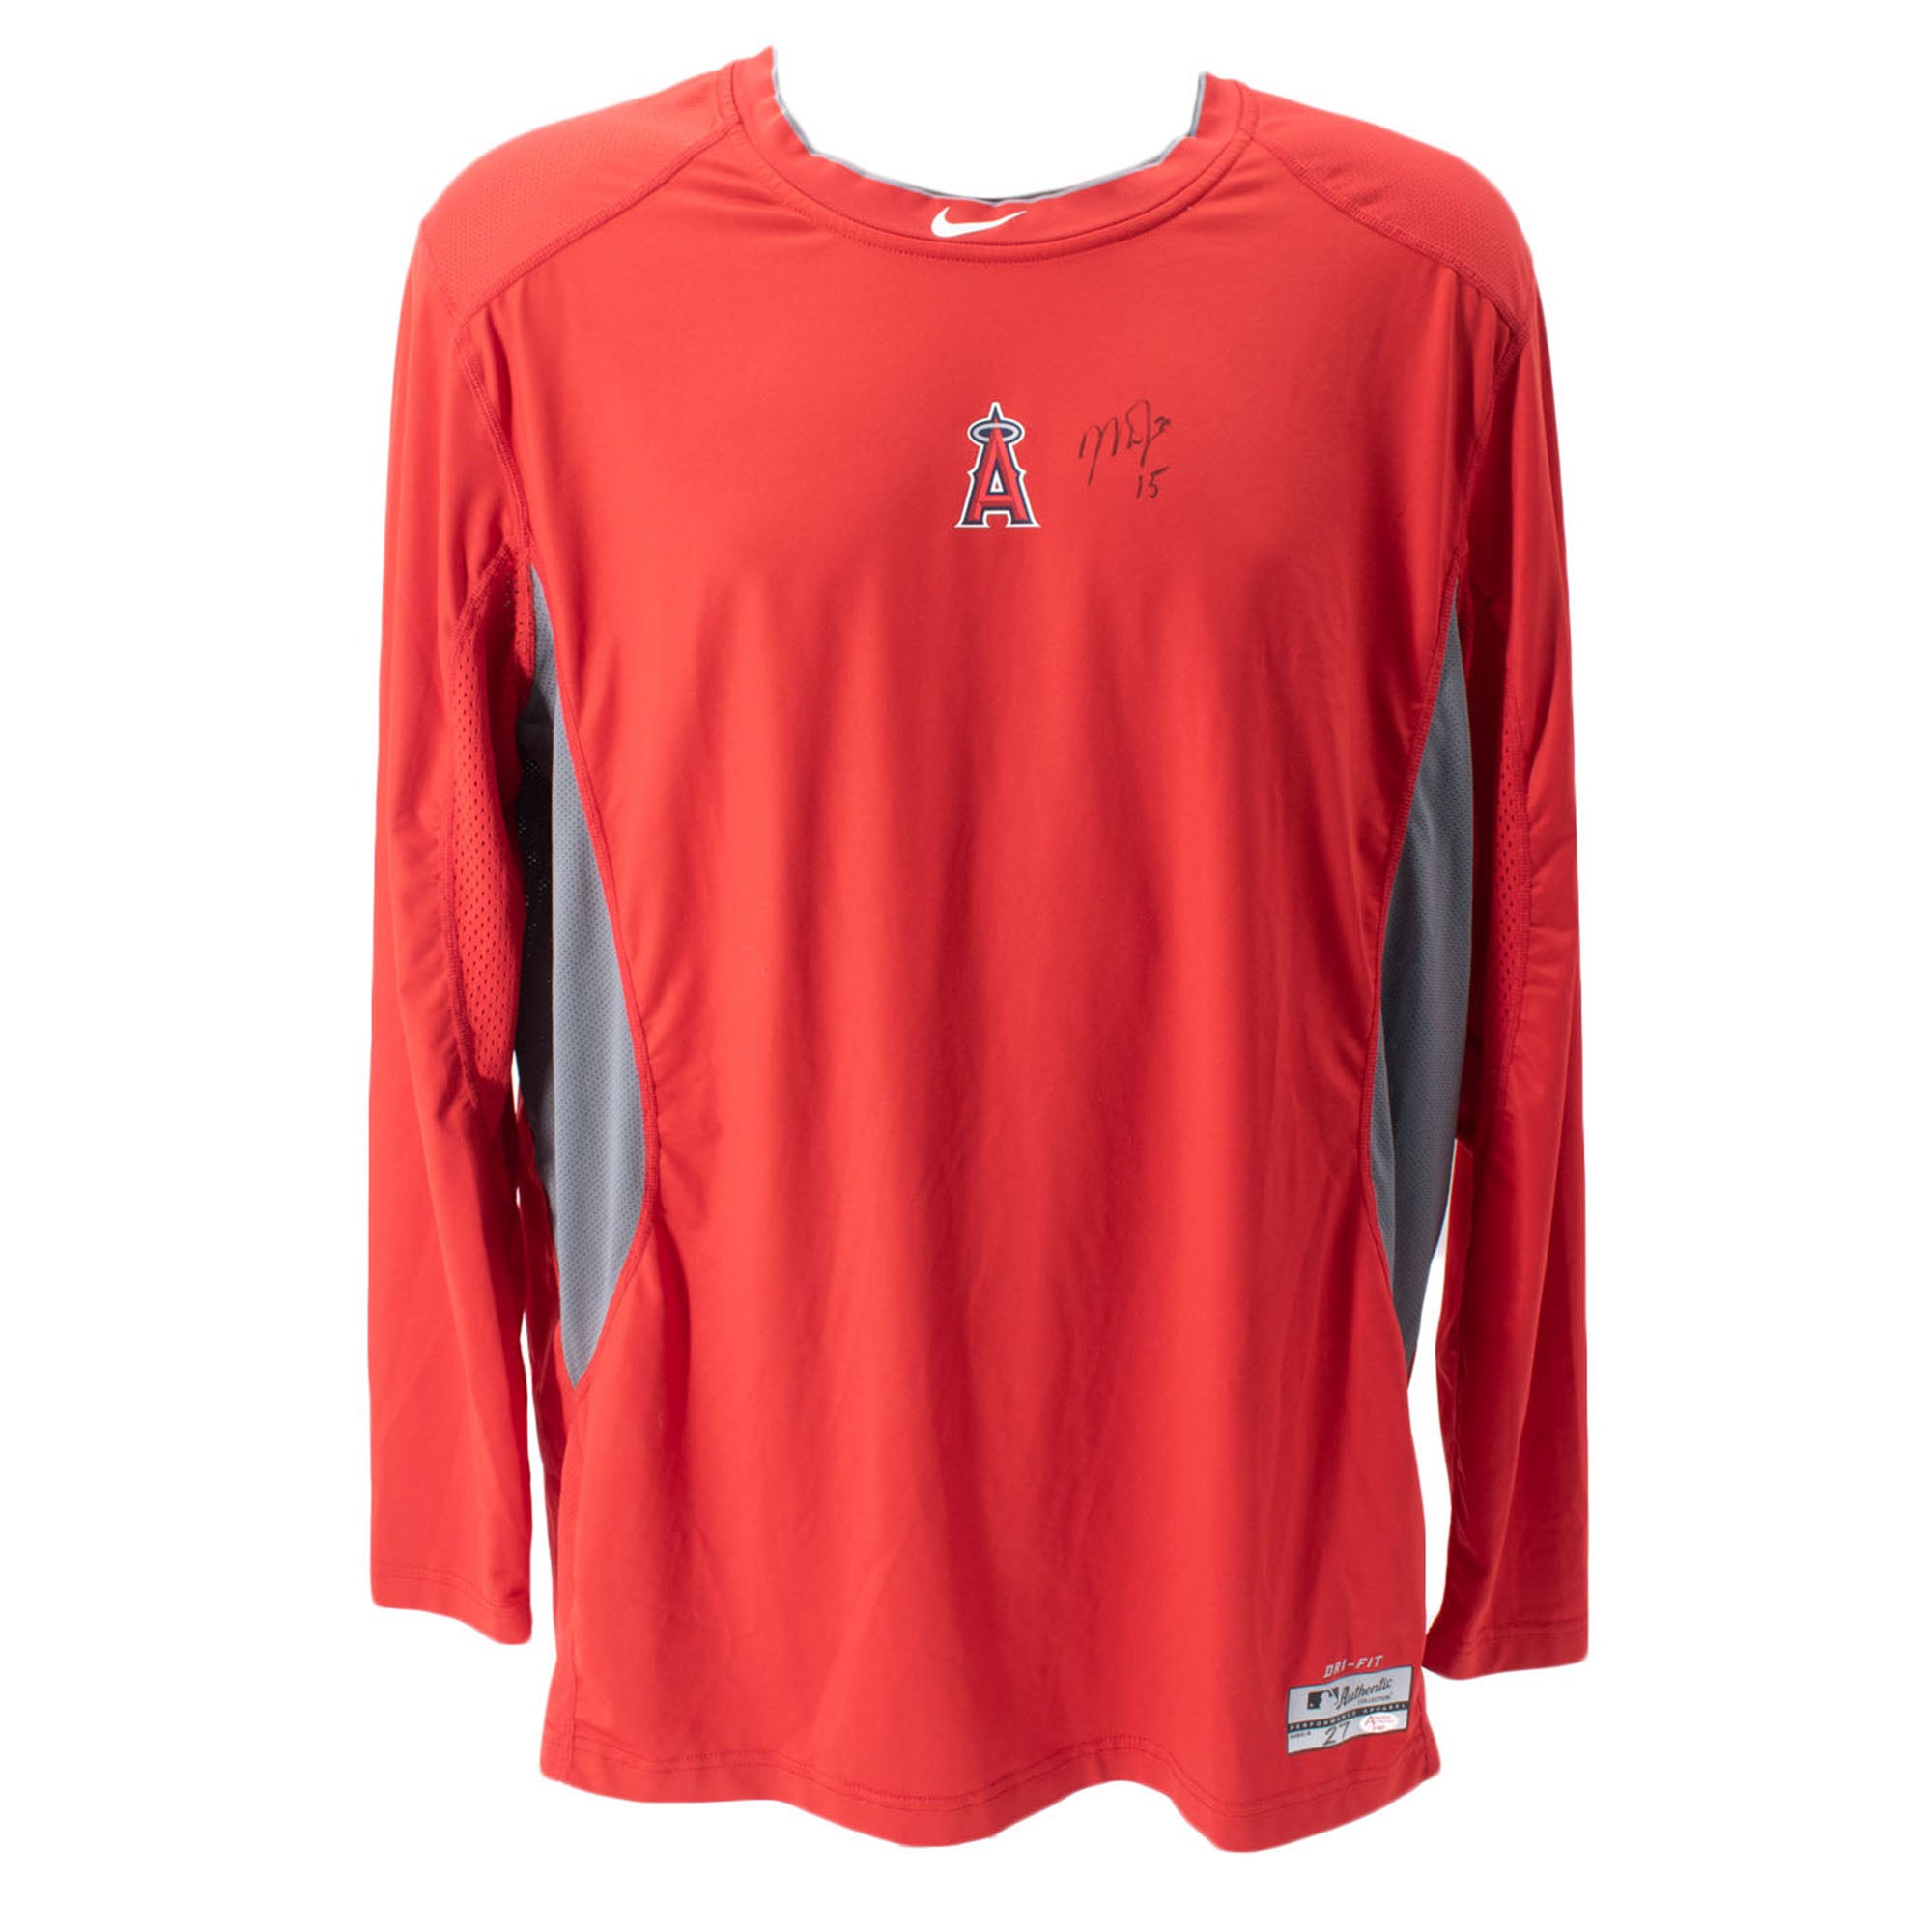 Mike Trout 2015 Game Worn Undershirt